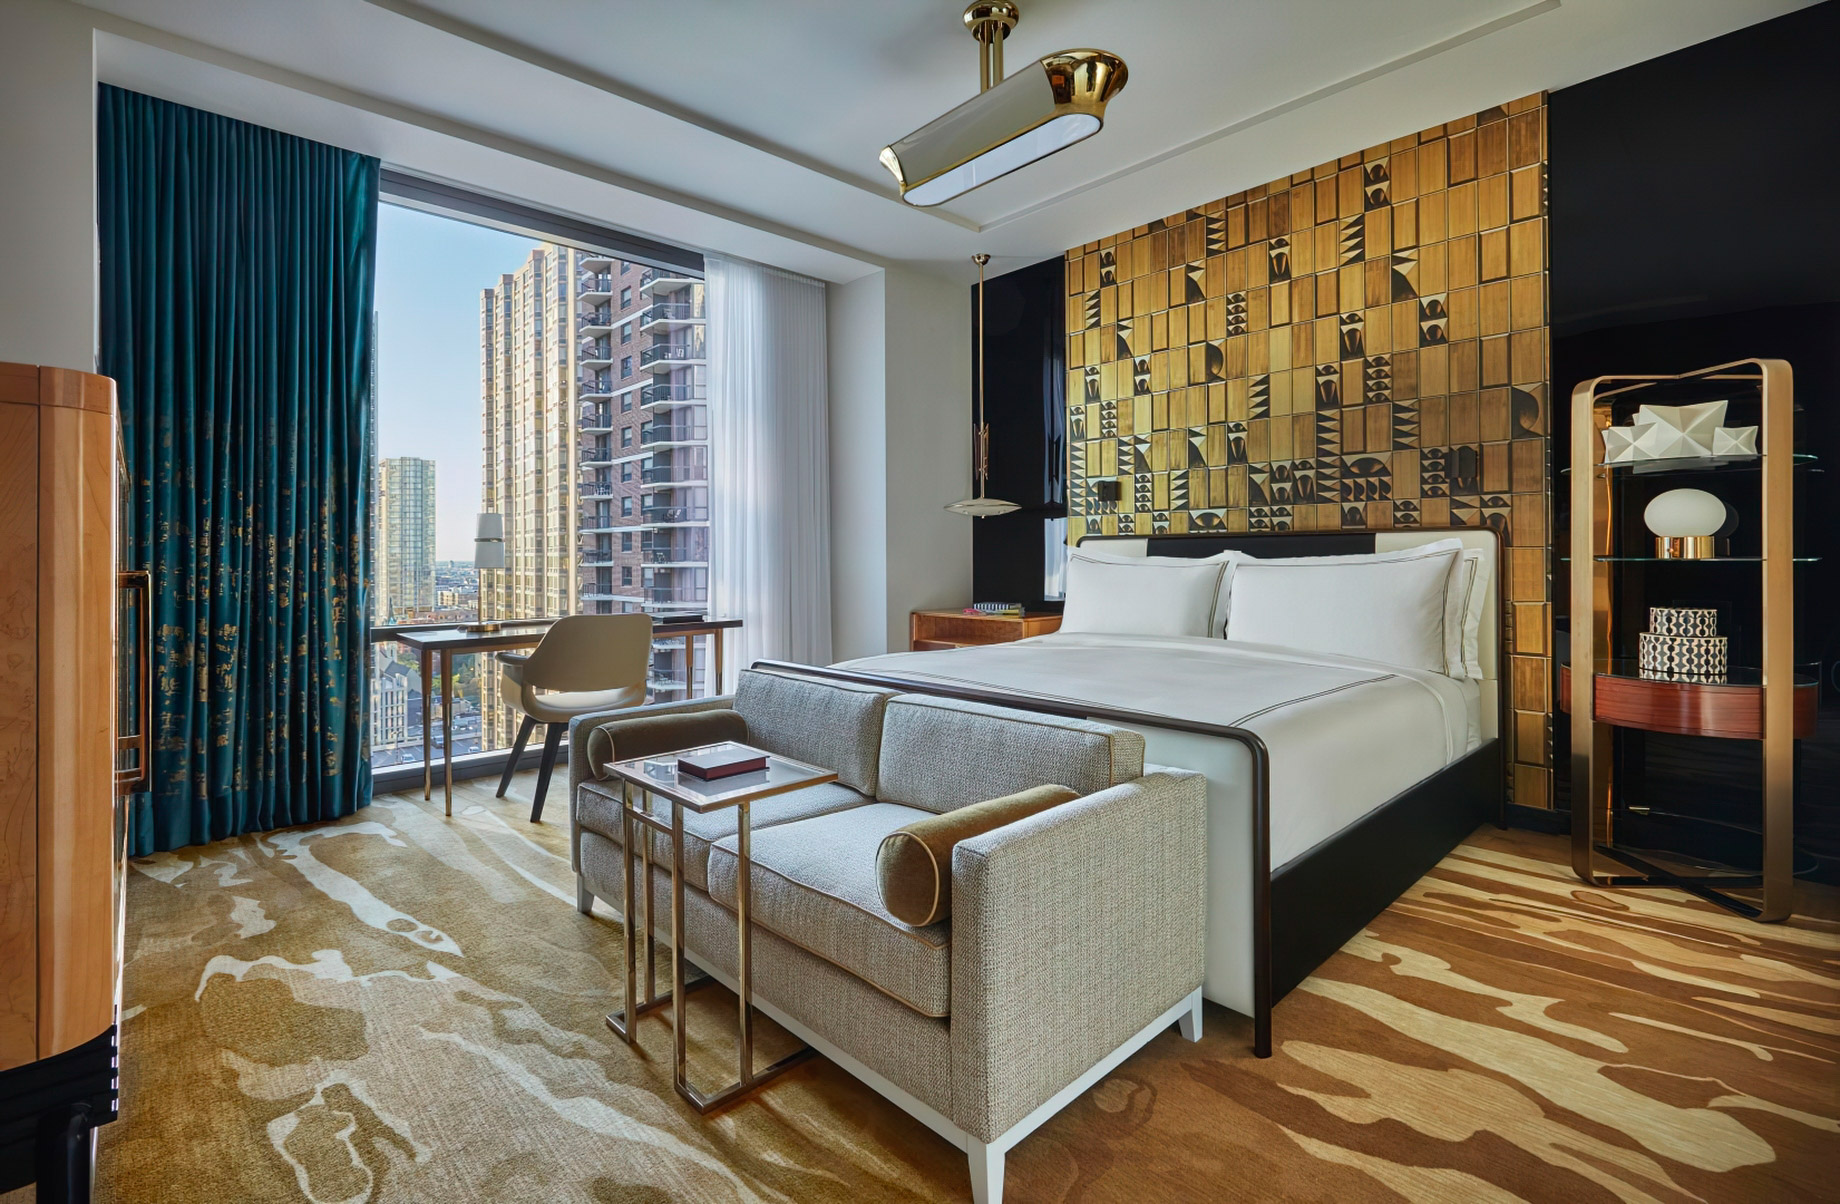 Viceroy Chicago Hotel – Chicago, IL, USA – Grand King Room